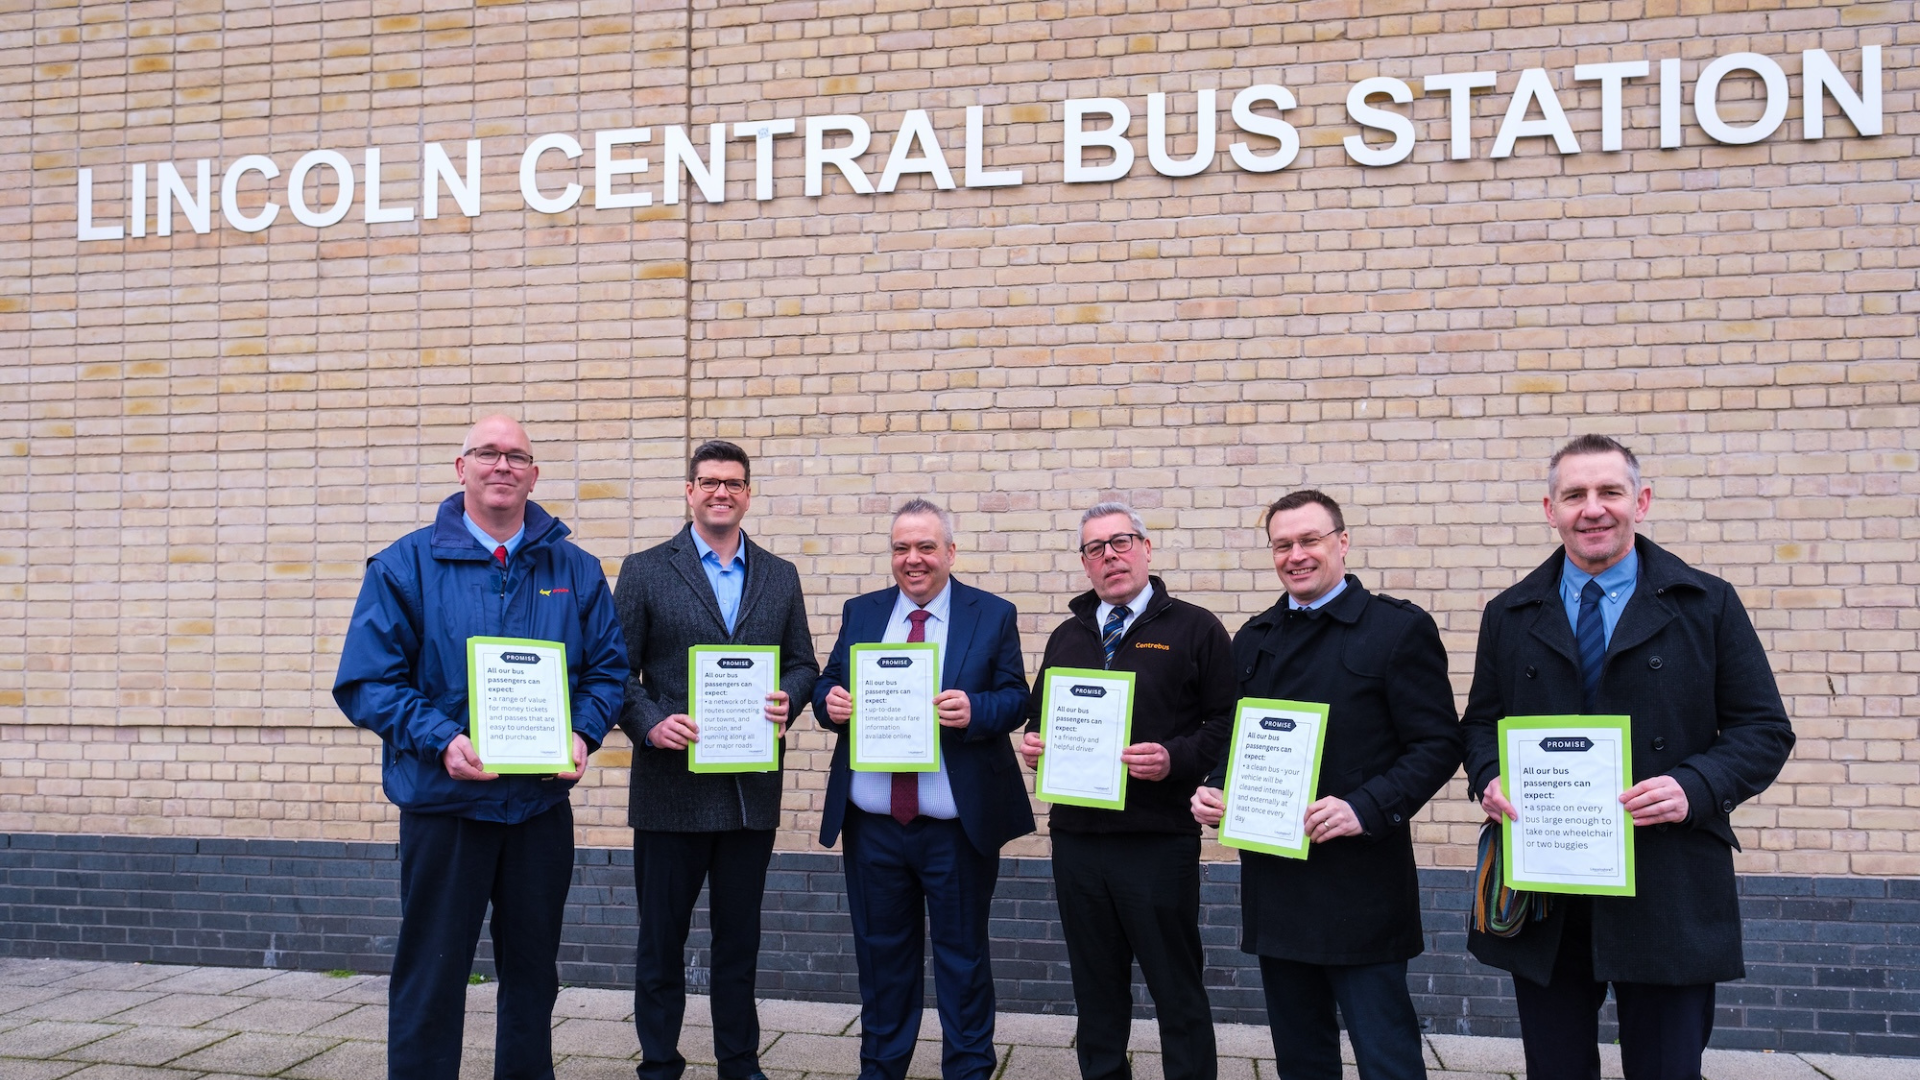 Transport bosses stand holding the charter.